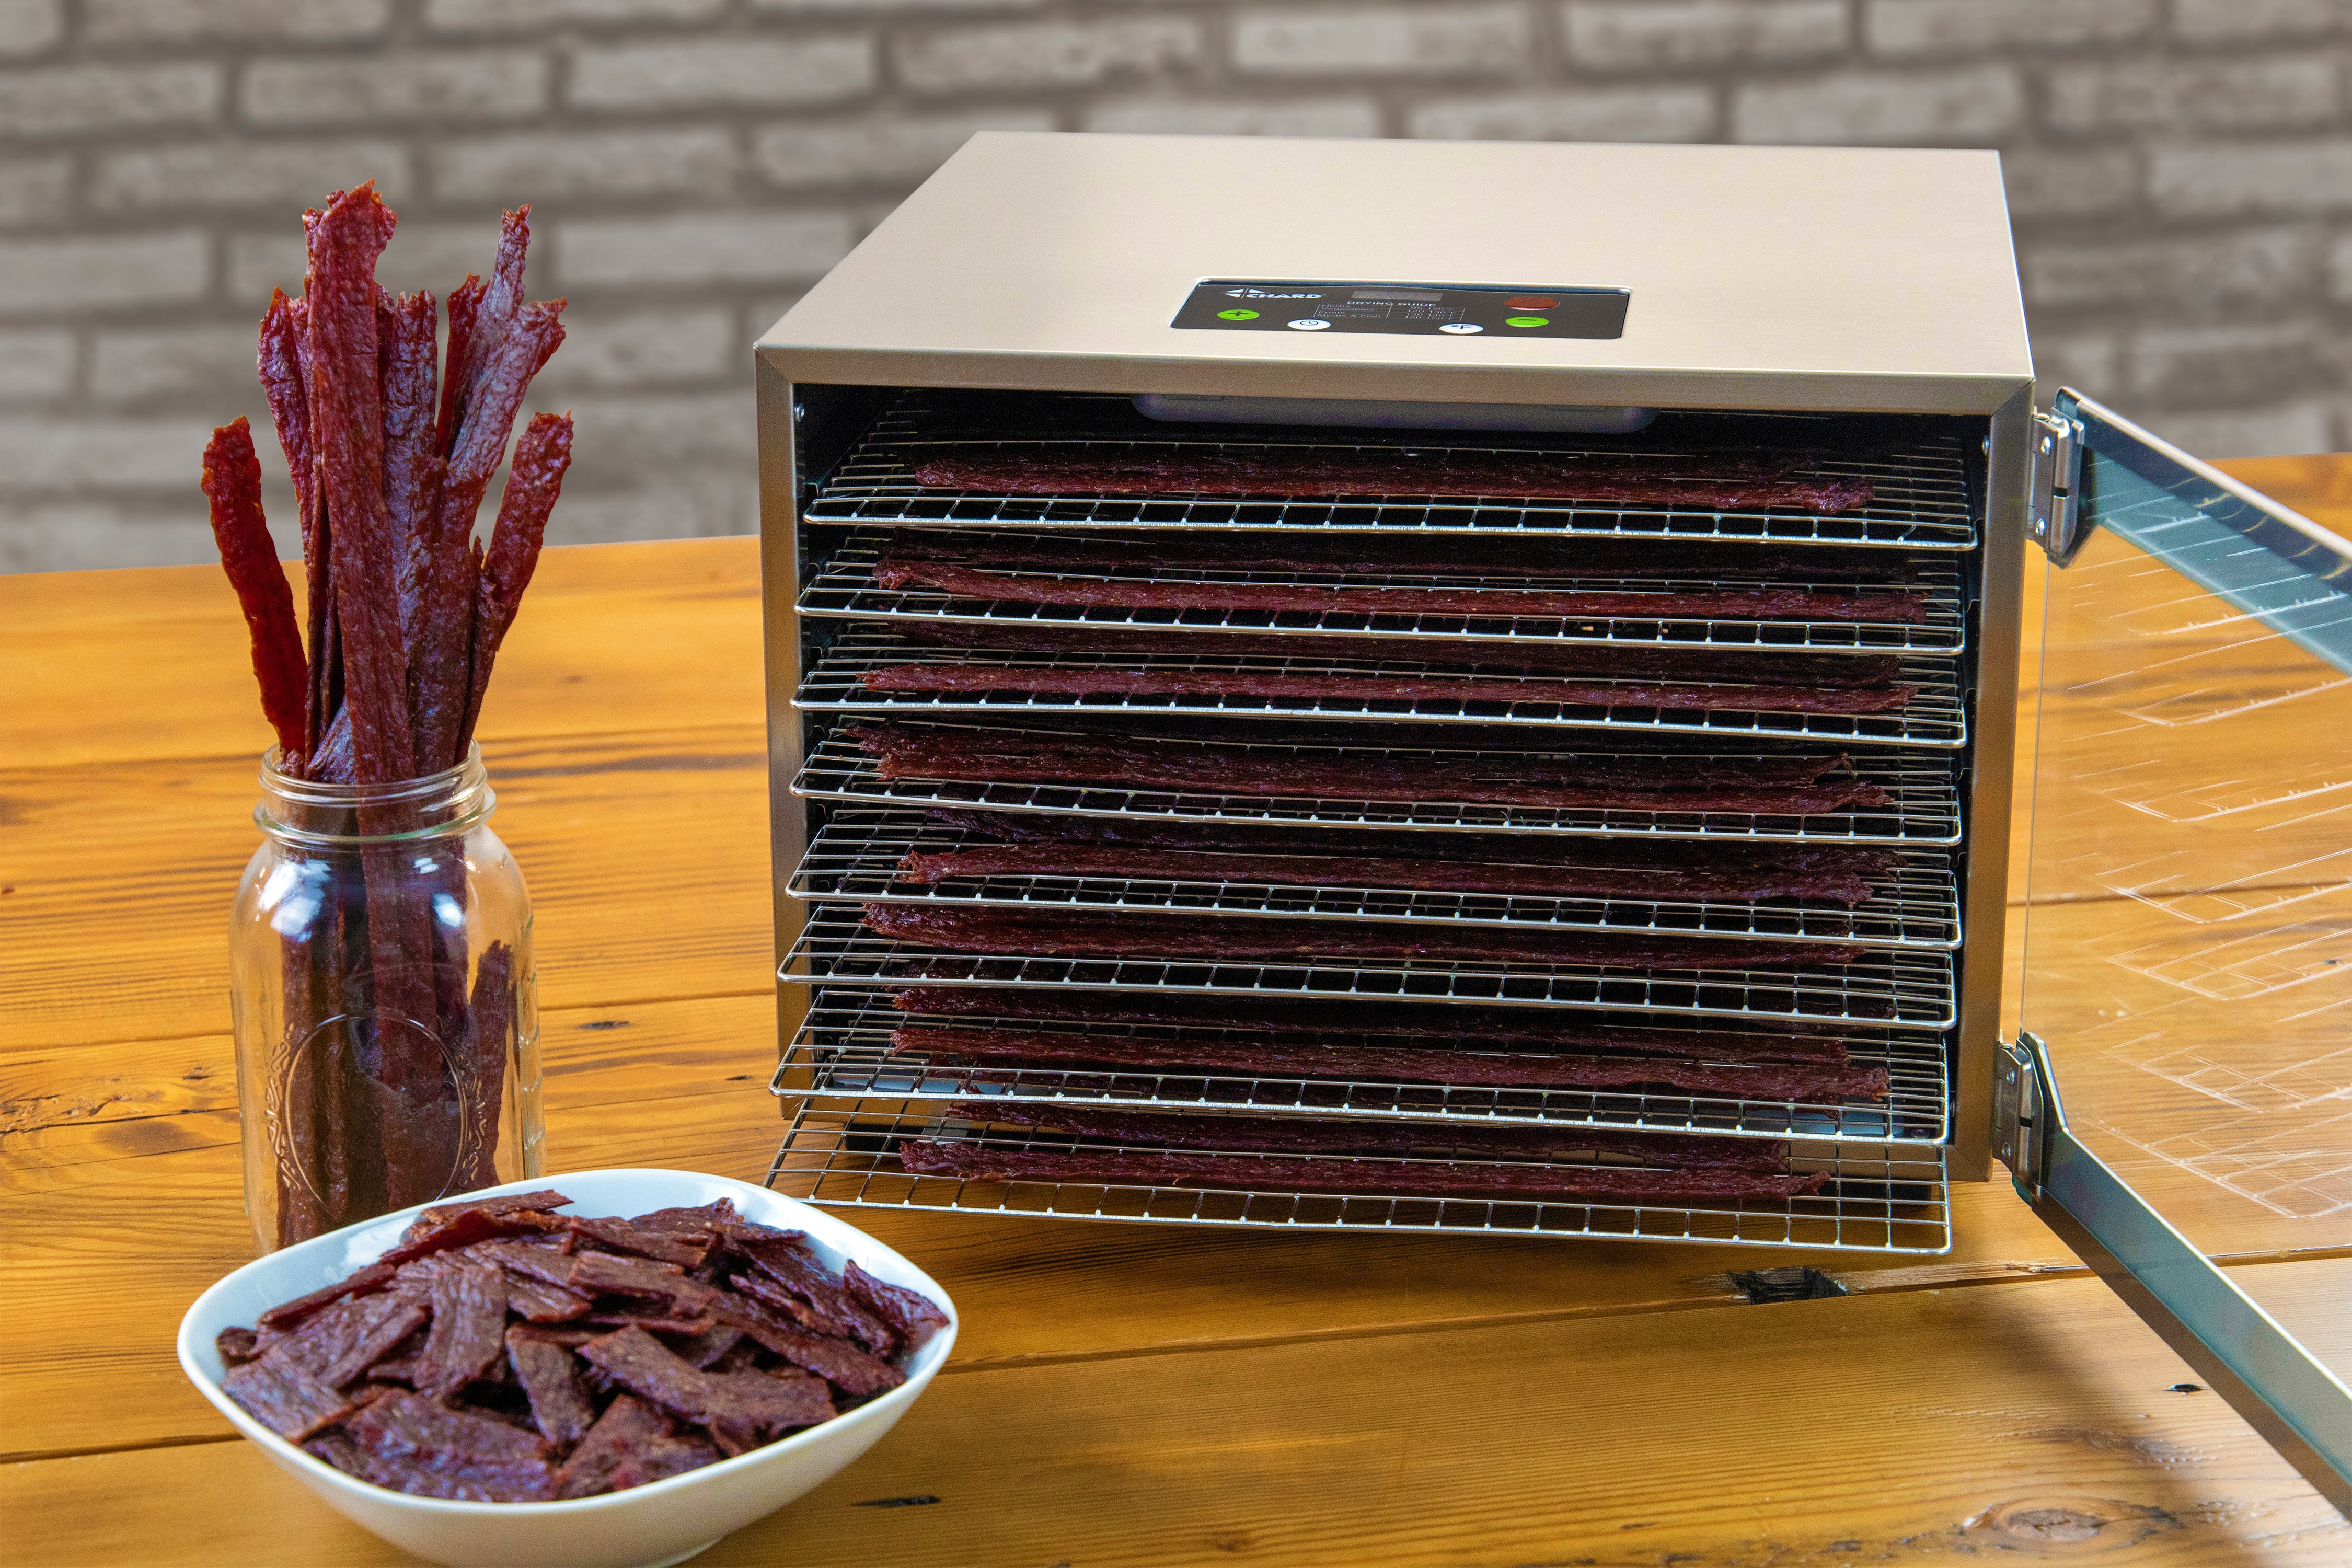 8 Stainless Steel Digital Dehydrator Products